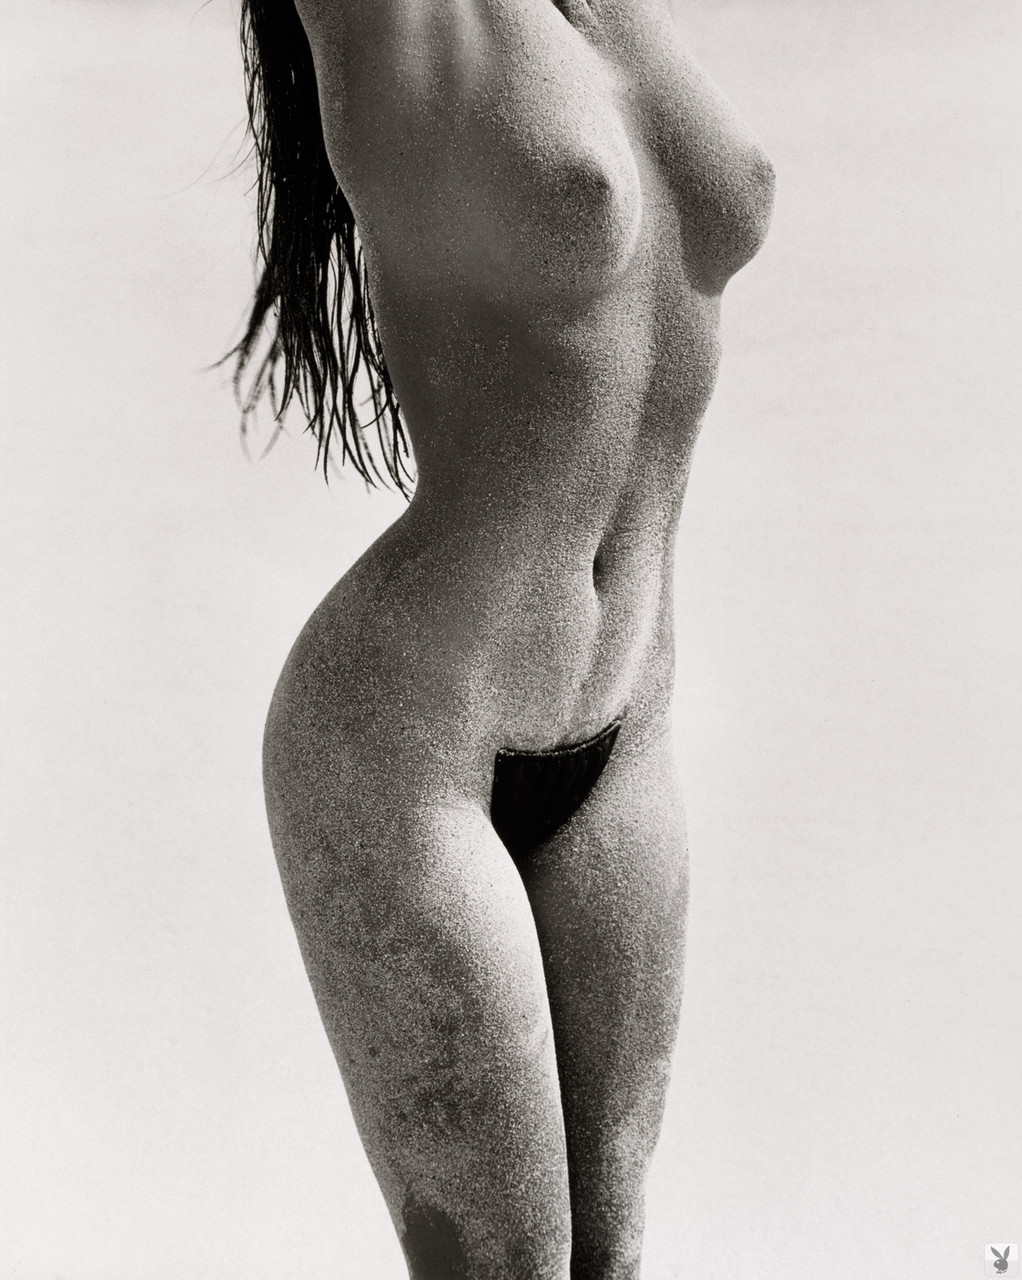 Sexy celebrity Cindy Crawford posing naked for the black and white photo shoot foto porno #423810475 | Playboy Plus Pics, Cindy Crawford, Centerfold, porno móvil